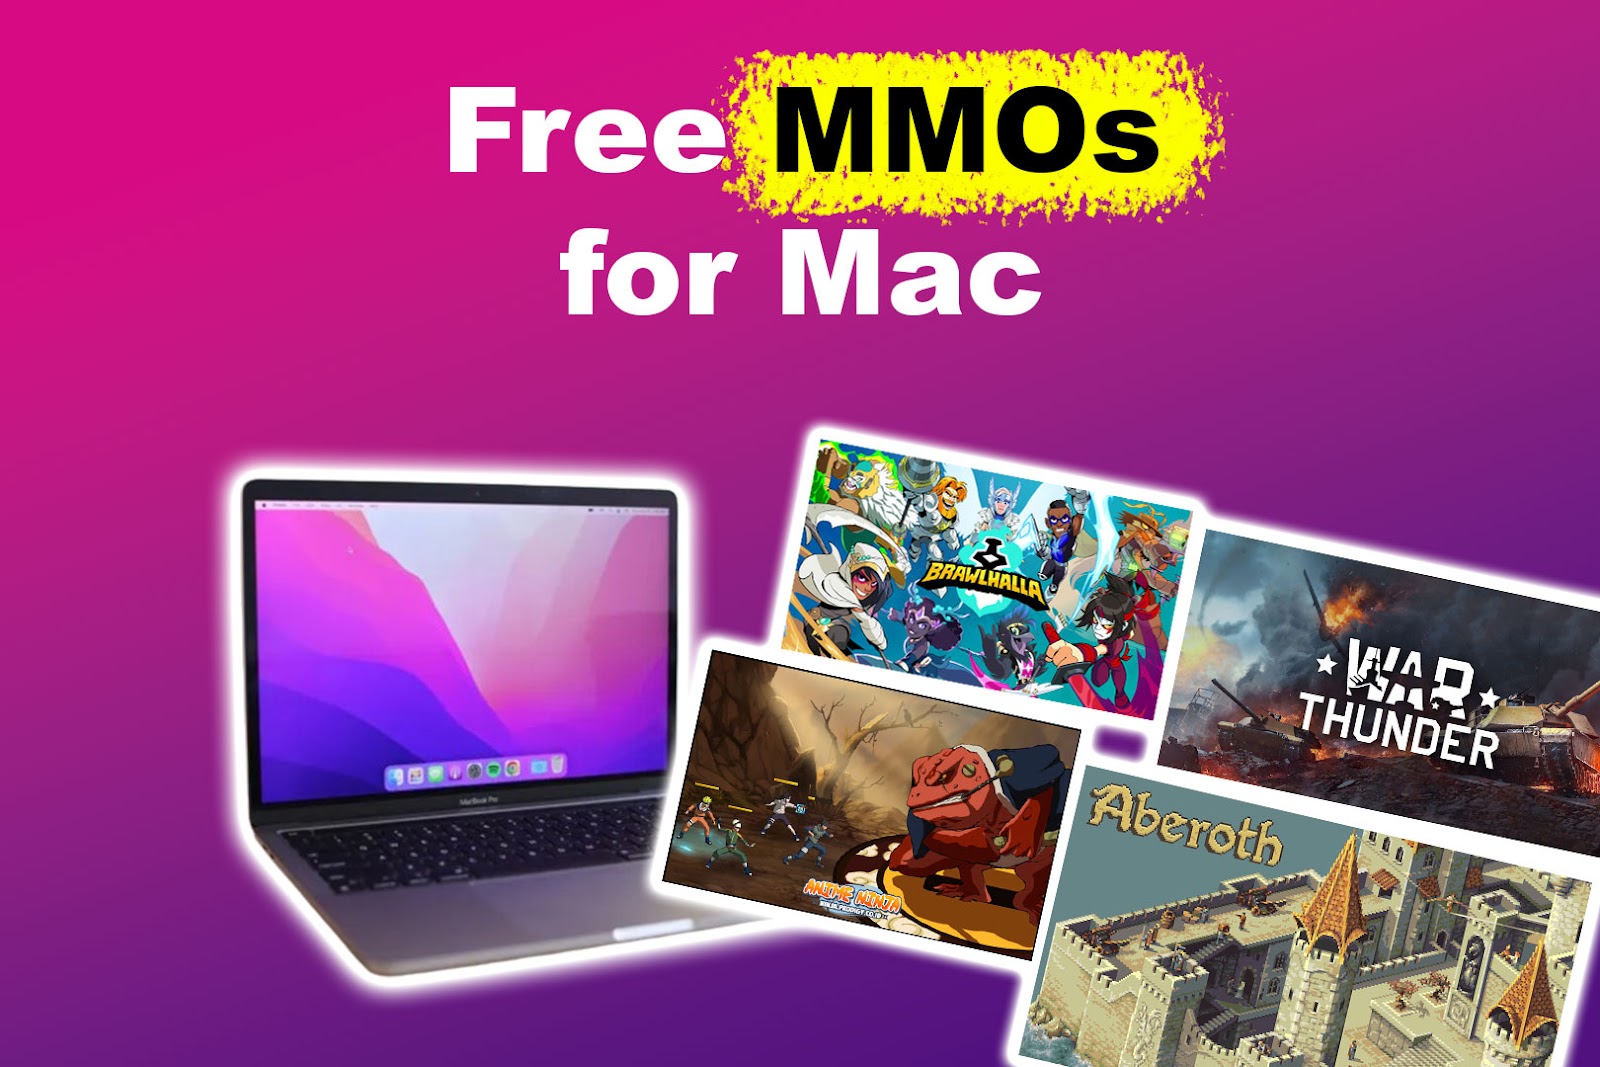 Free MMOs for Mac